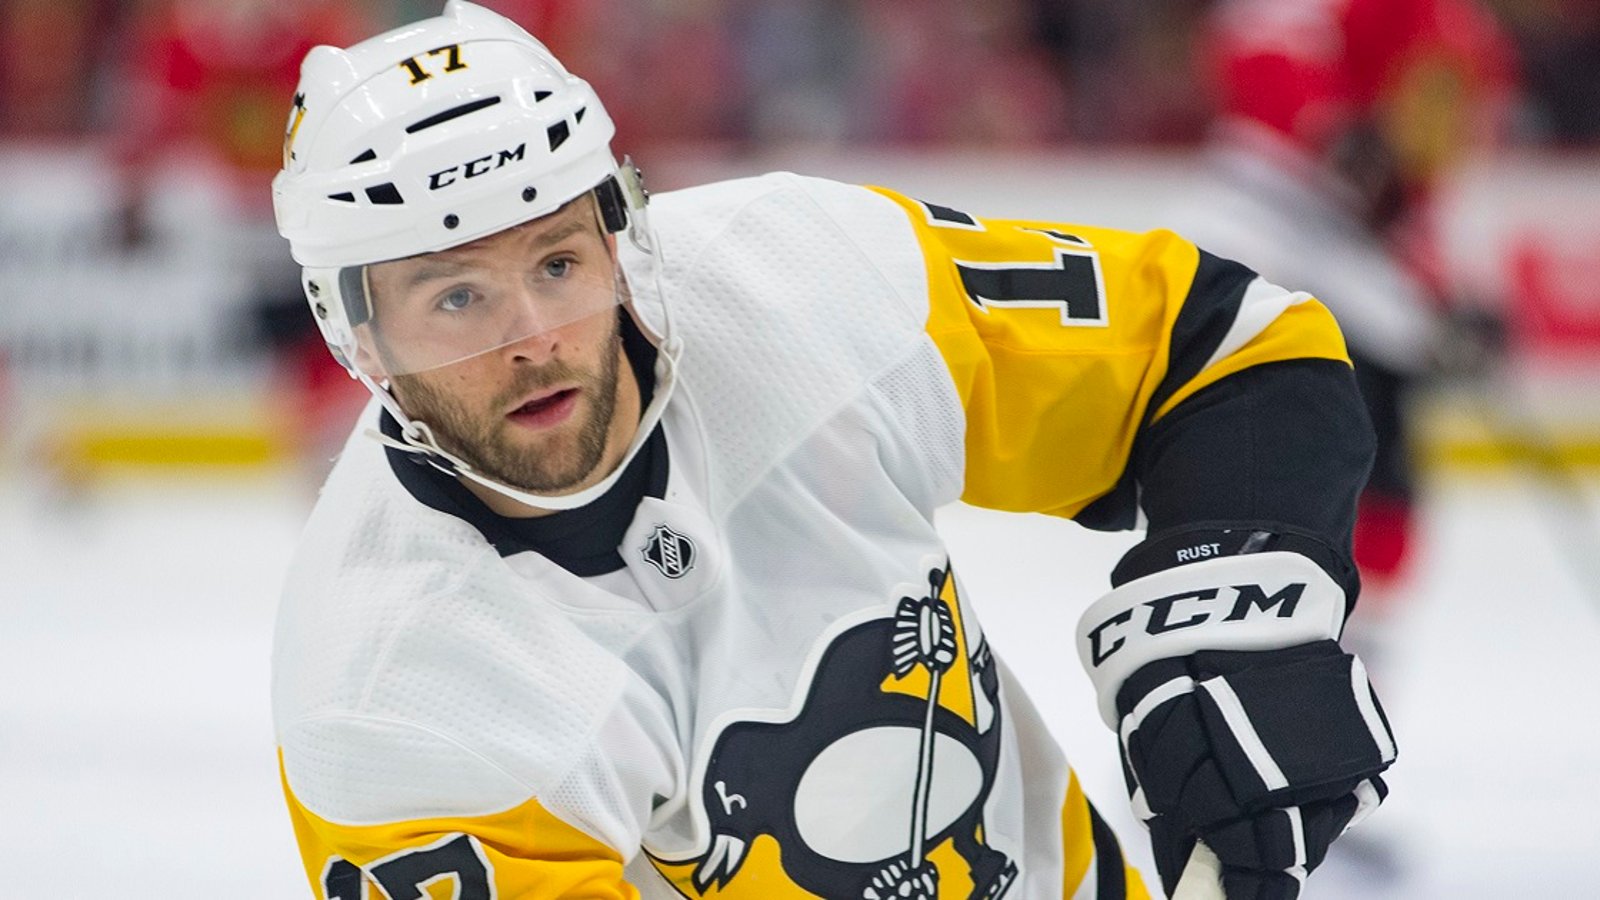 Report: Penguins lose 2 players to injury.